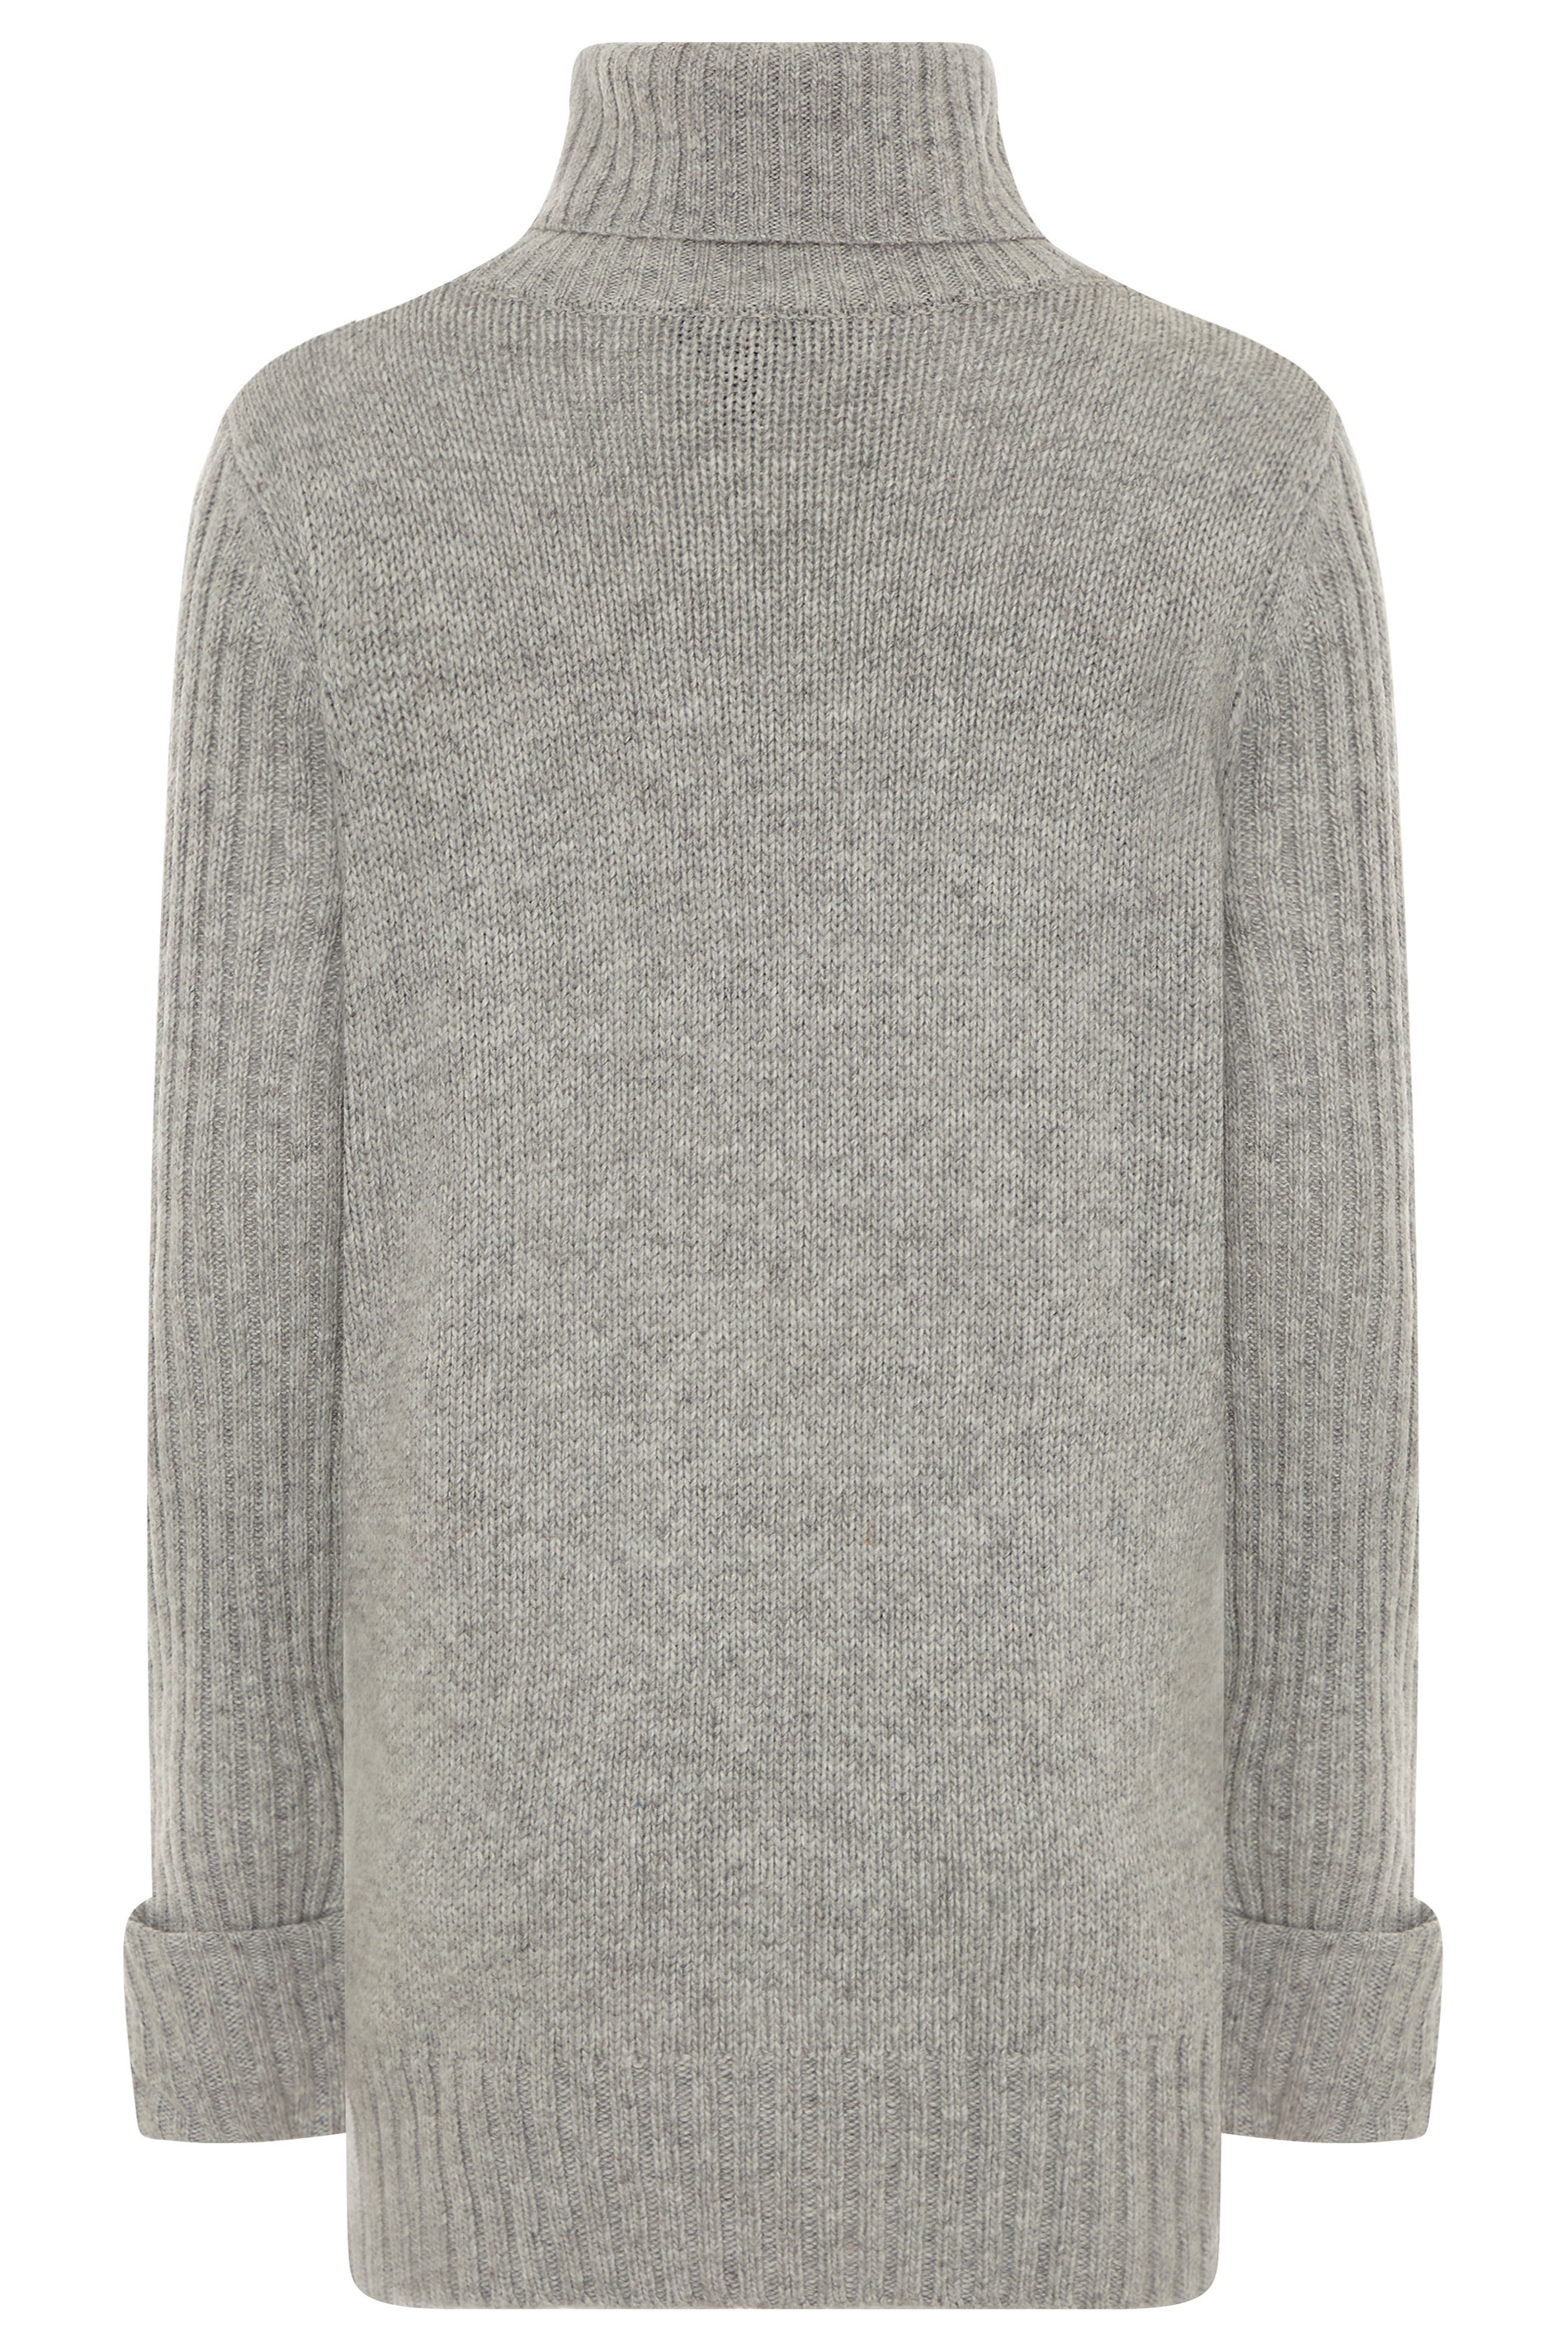 Grey Cable Knitted Cowl Neck Jumper | Long Tall Sally